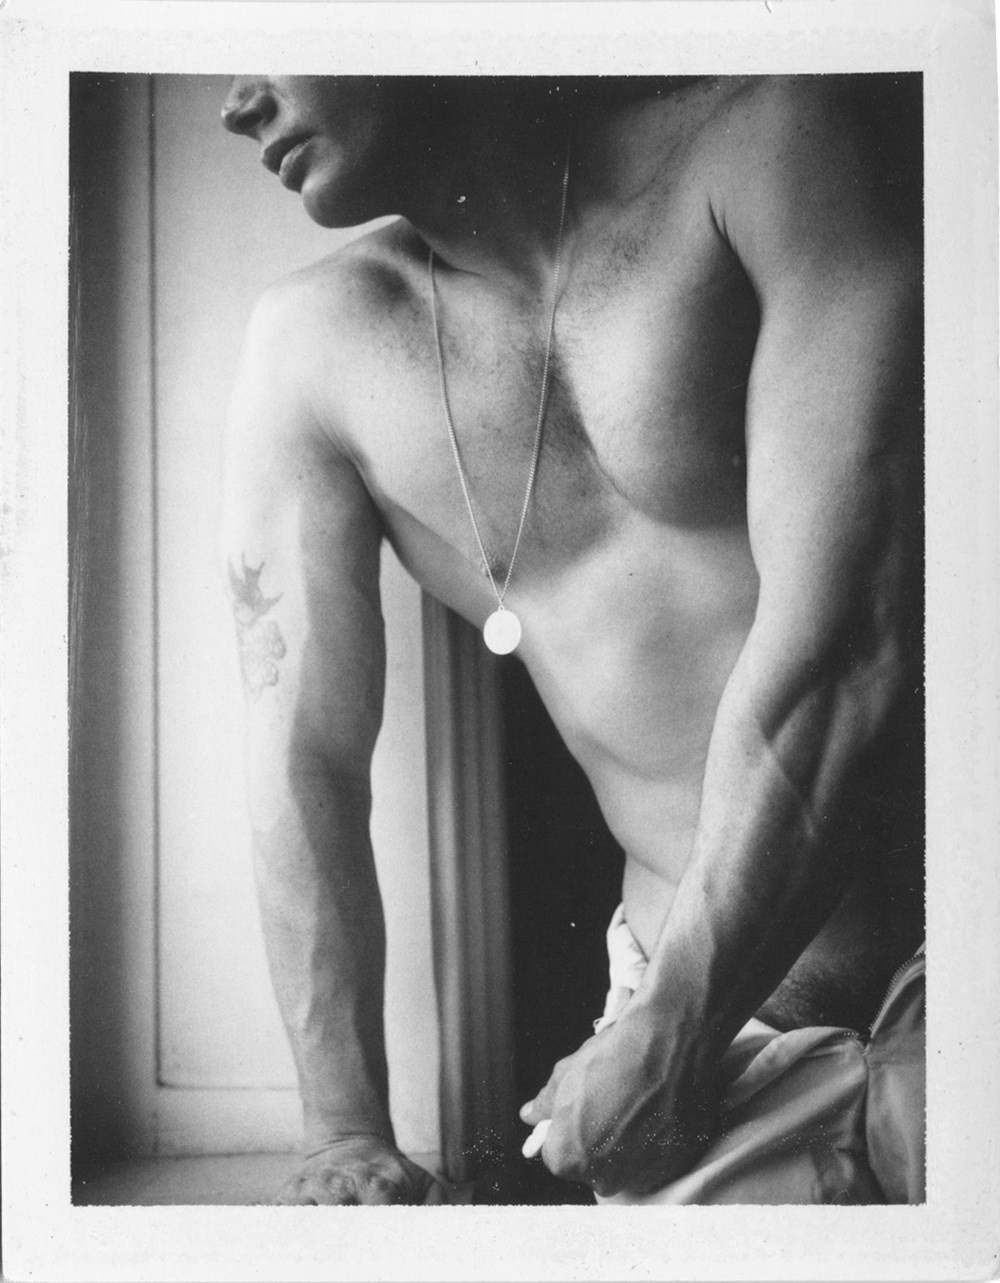 Black Vintage Nude Soldiers - The Man Who Changed Male Erotica Forever | AnOther